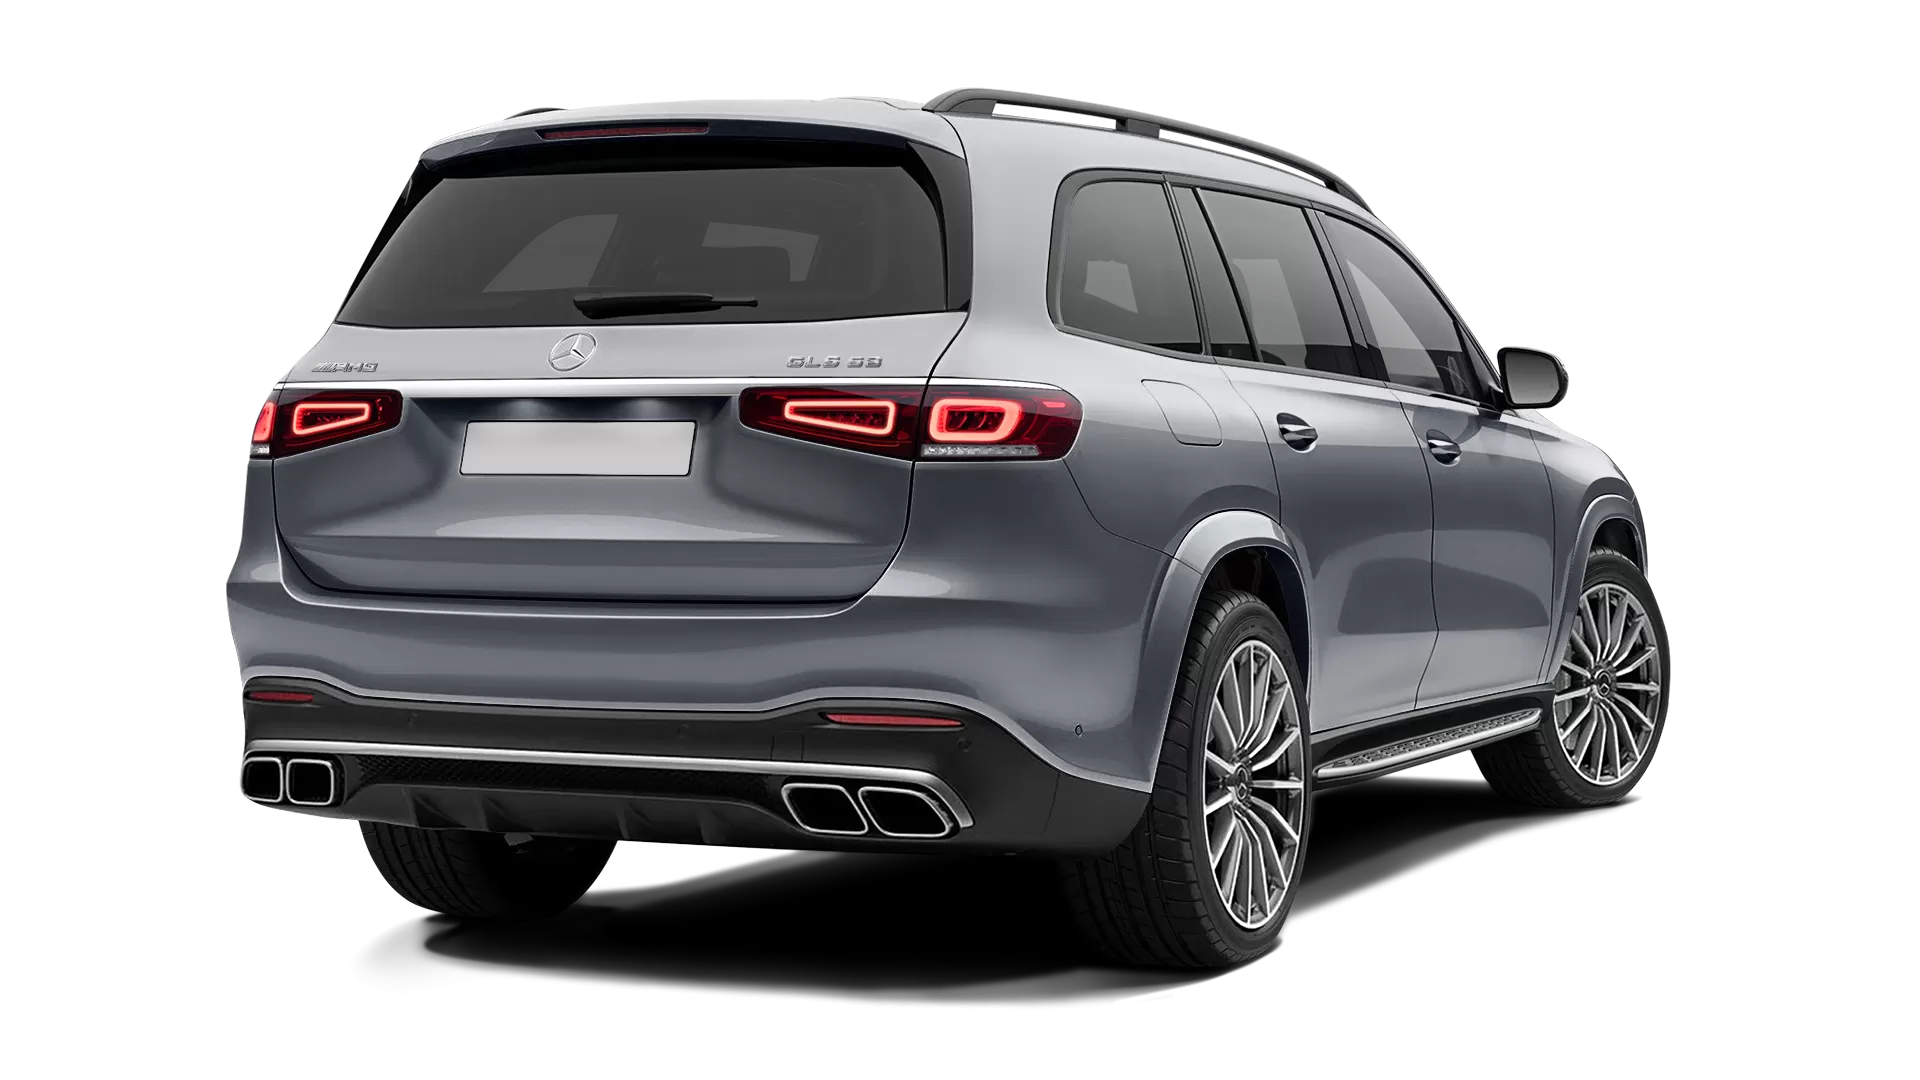 Mercedes GLS 63 AMG X167 with painted body kit: rear view shown in Selenite Grey